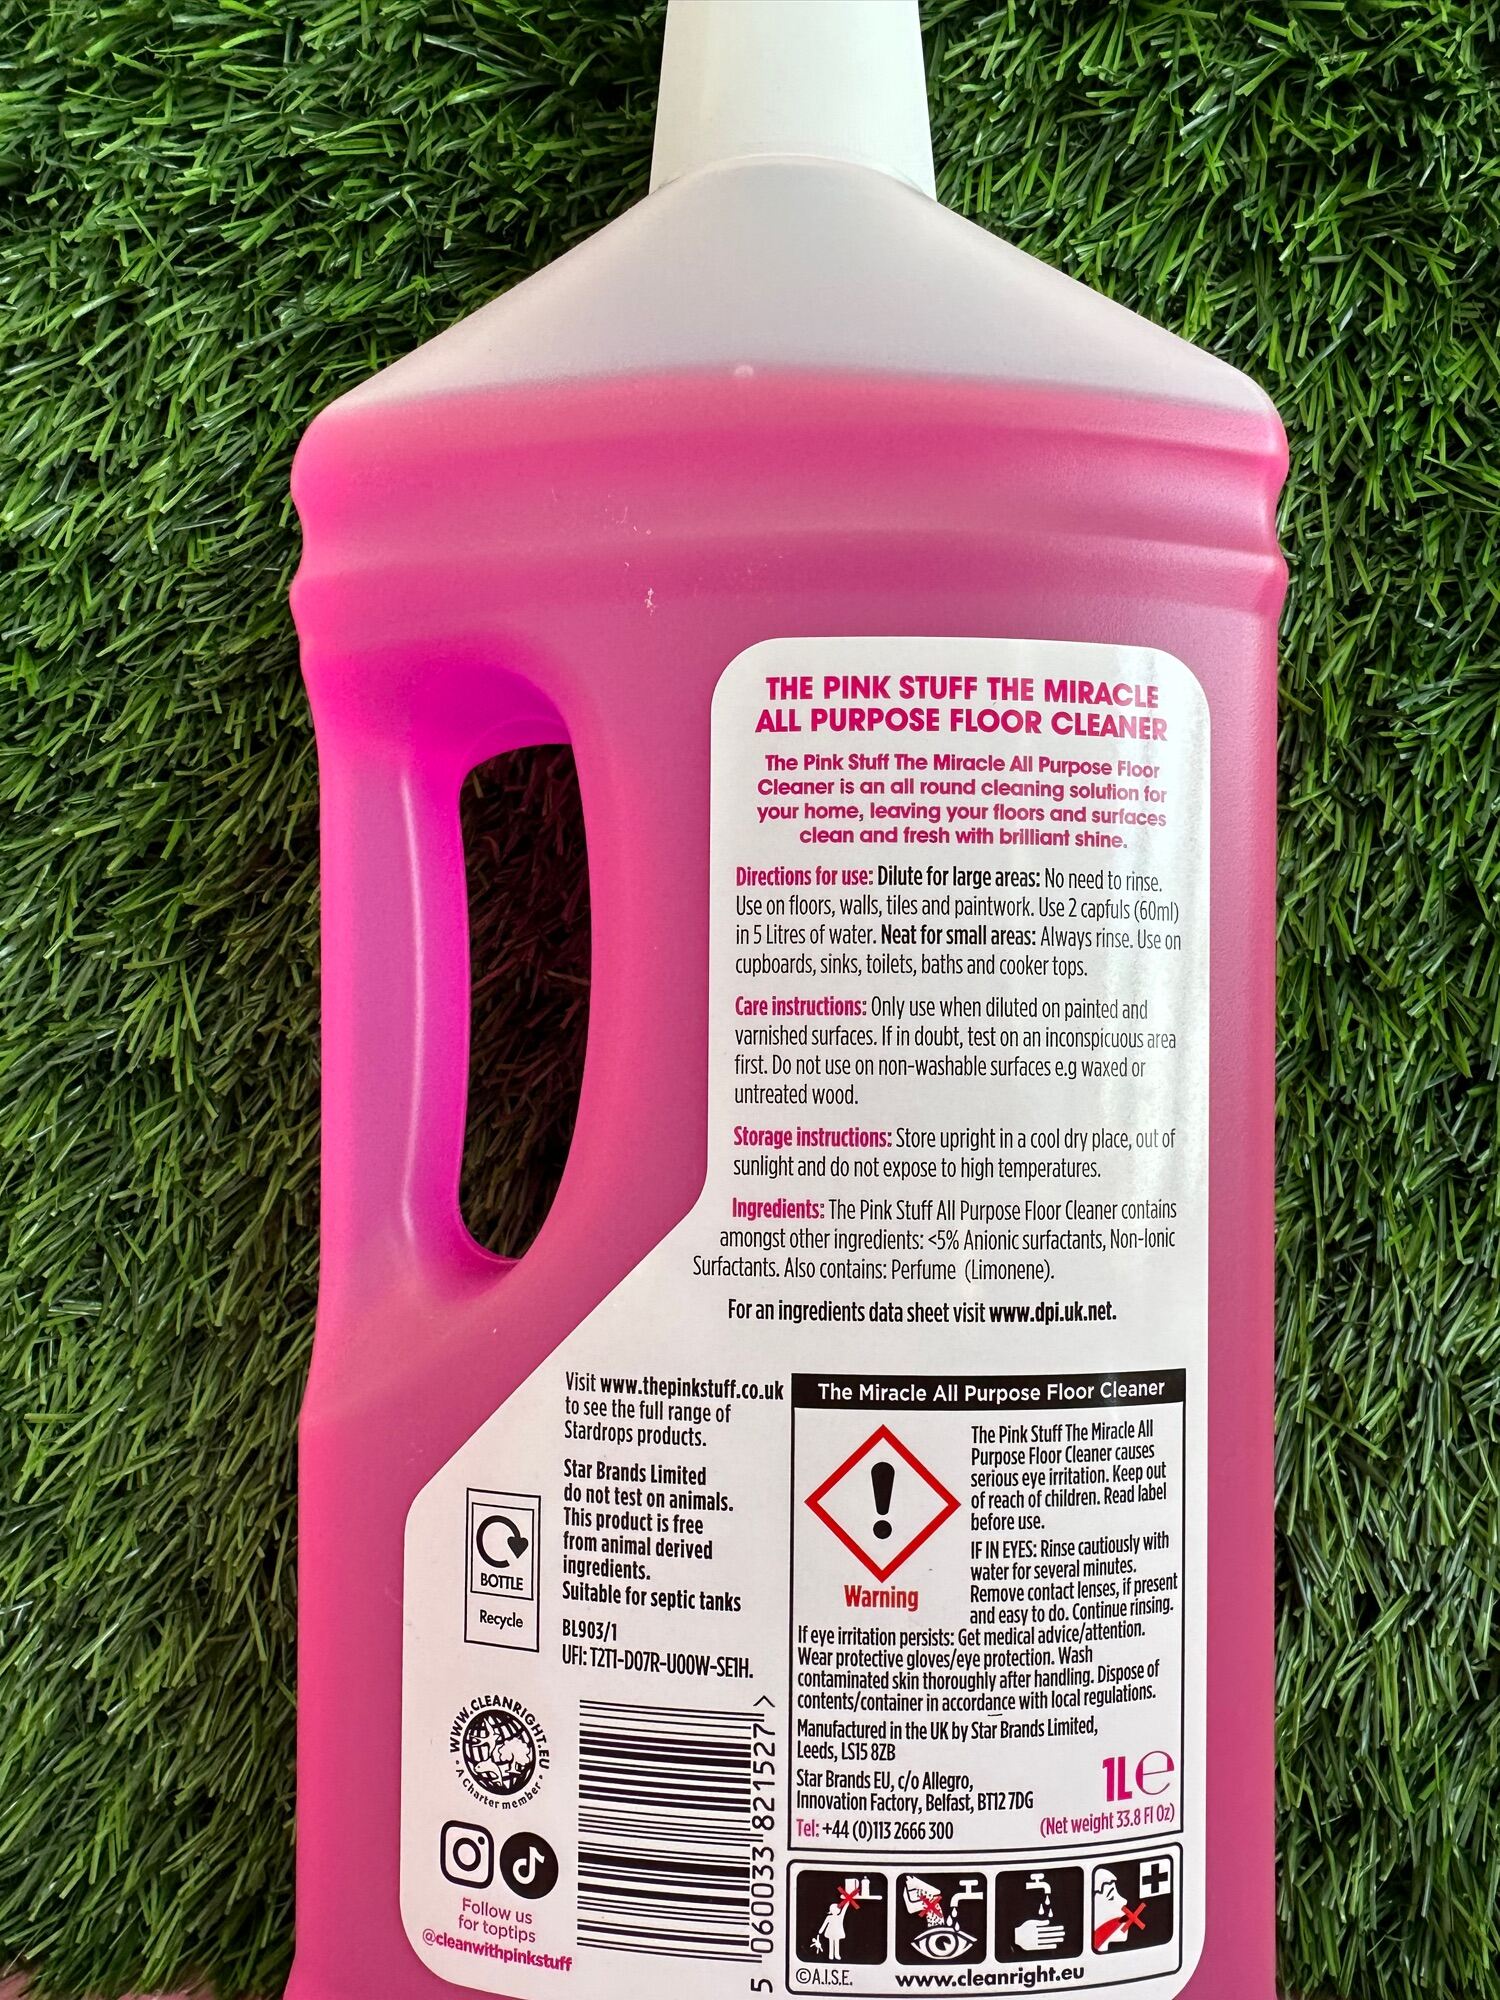 The Pink Stuff Miracle Bathroom Cleaner (750ml)